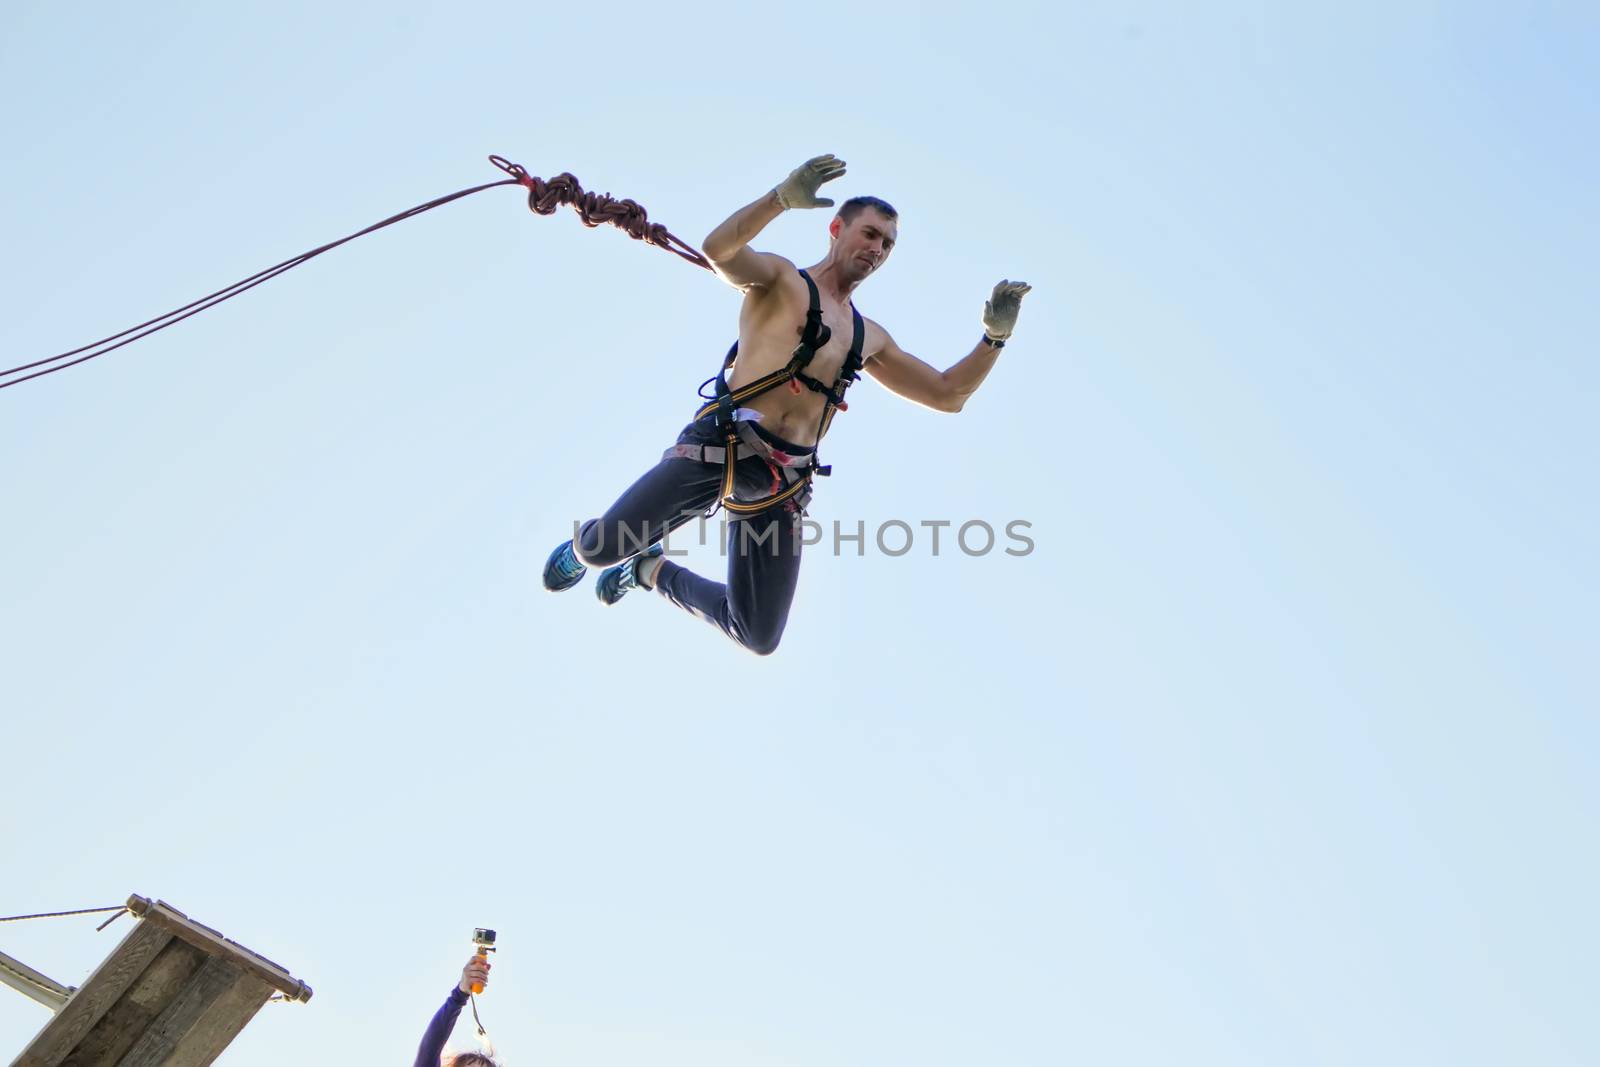 Jumping with a rope.The extreme guy jumped from a huge height.Ropejumping.